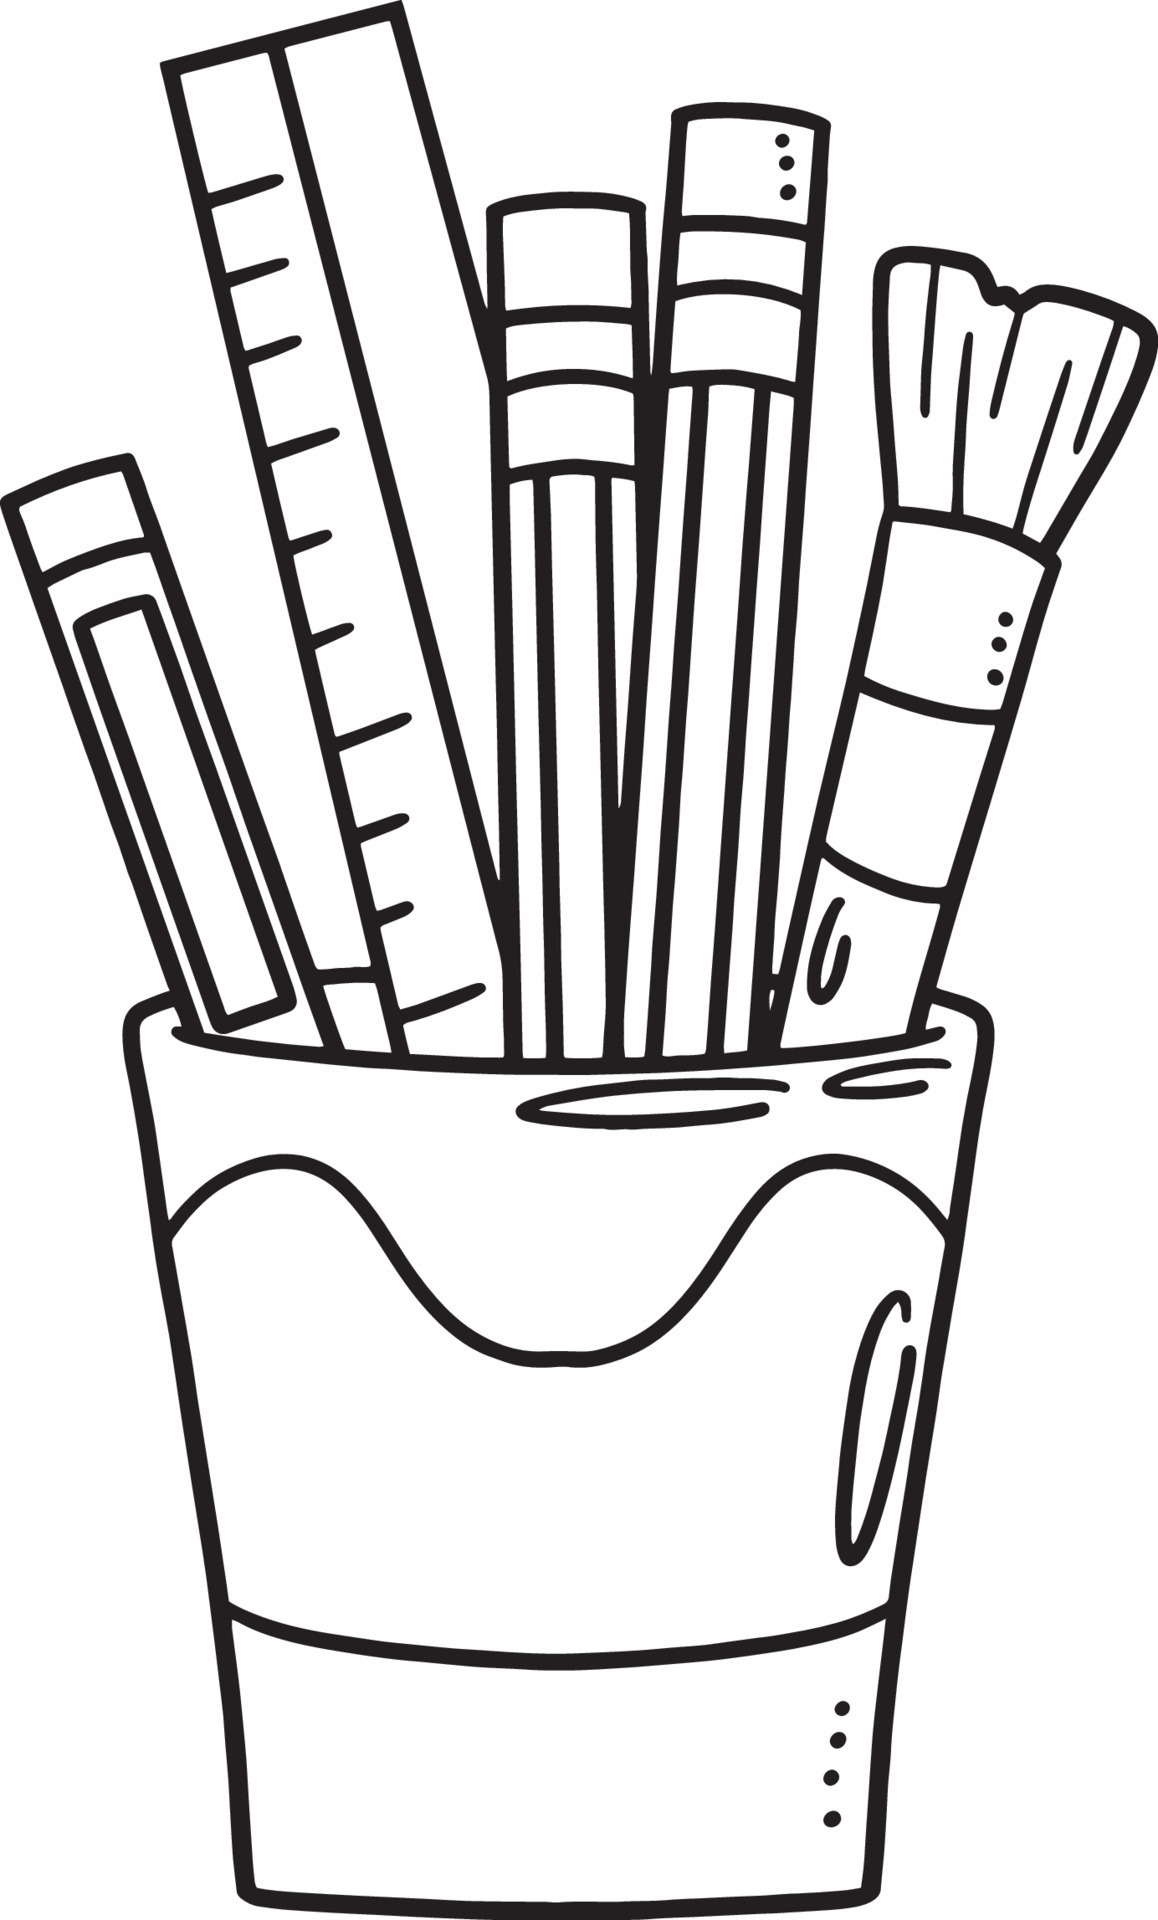 Pencil Case coloring page  Free Printable Coloring Pages